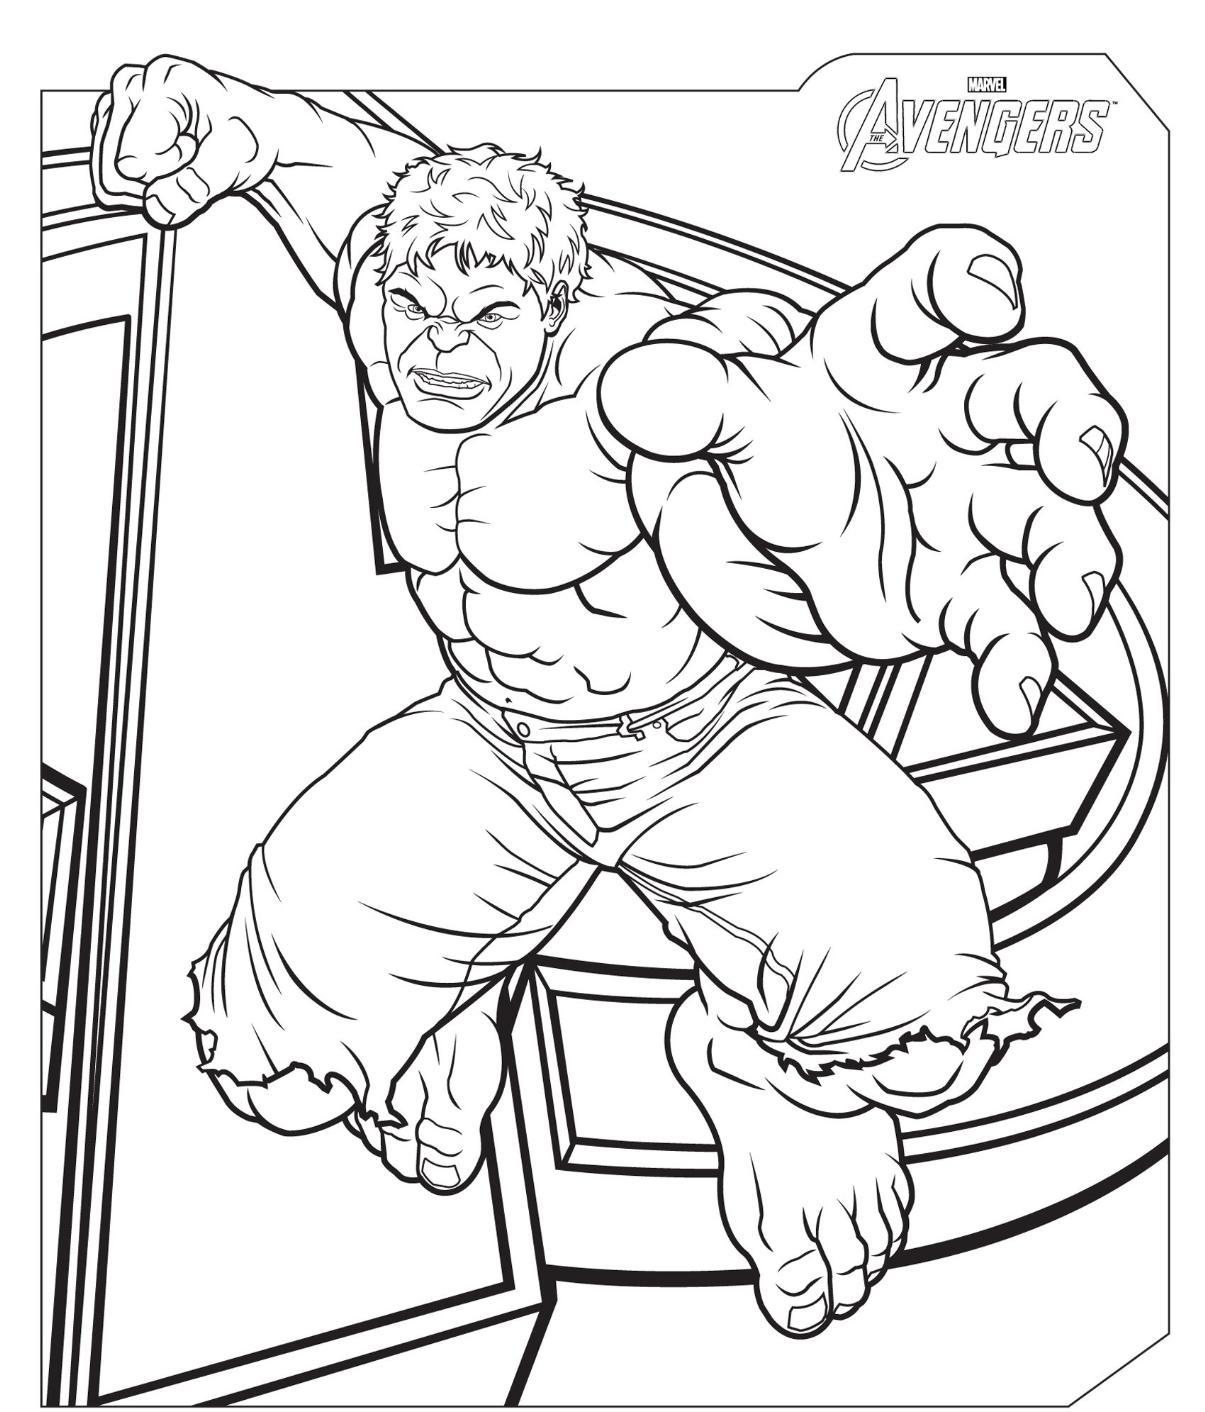 The Avengers Hulk S20f20 Coloring Pages   Coloring Cool